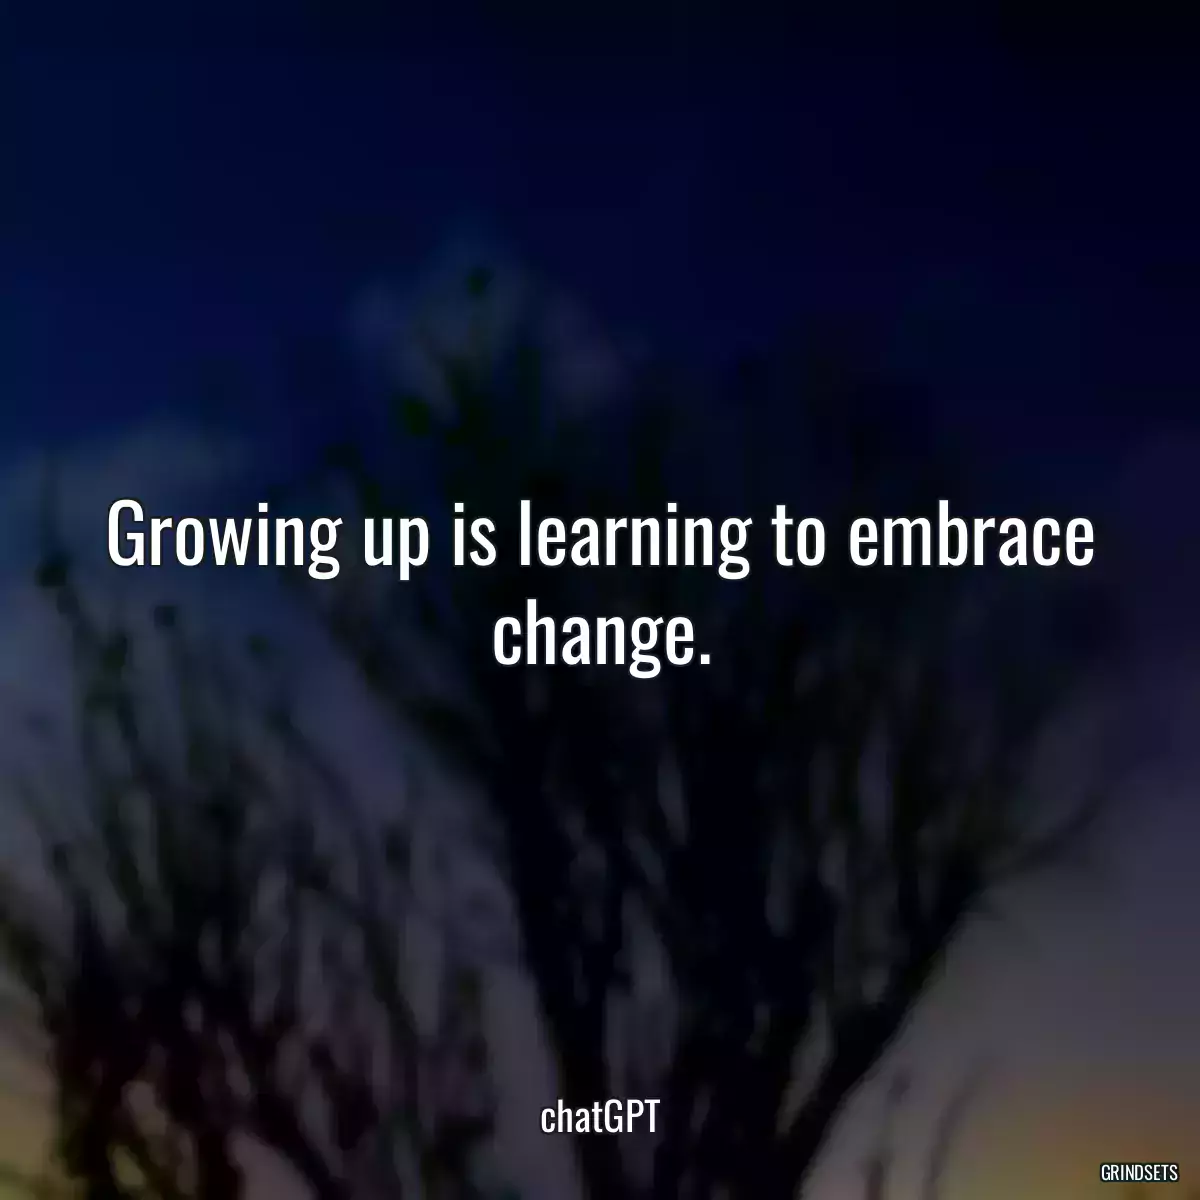 Growing up is learning to embrace change.